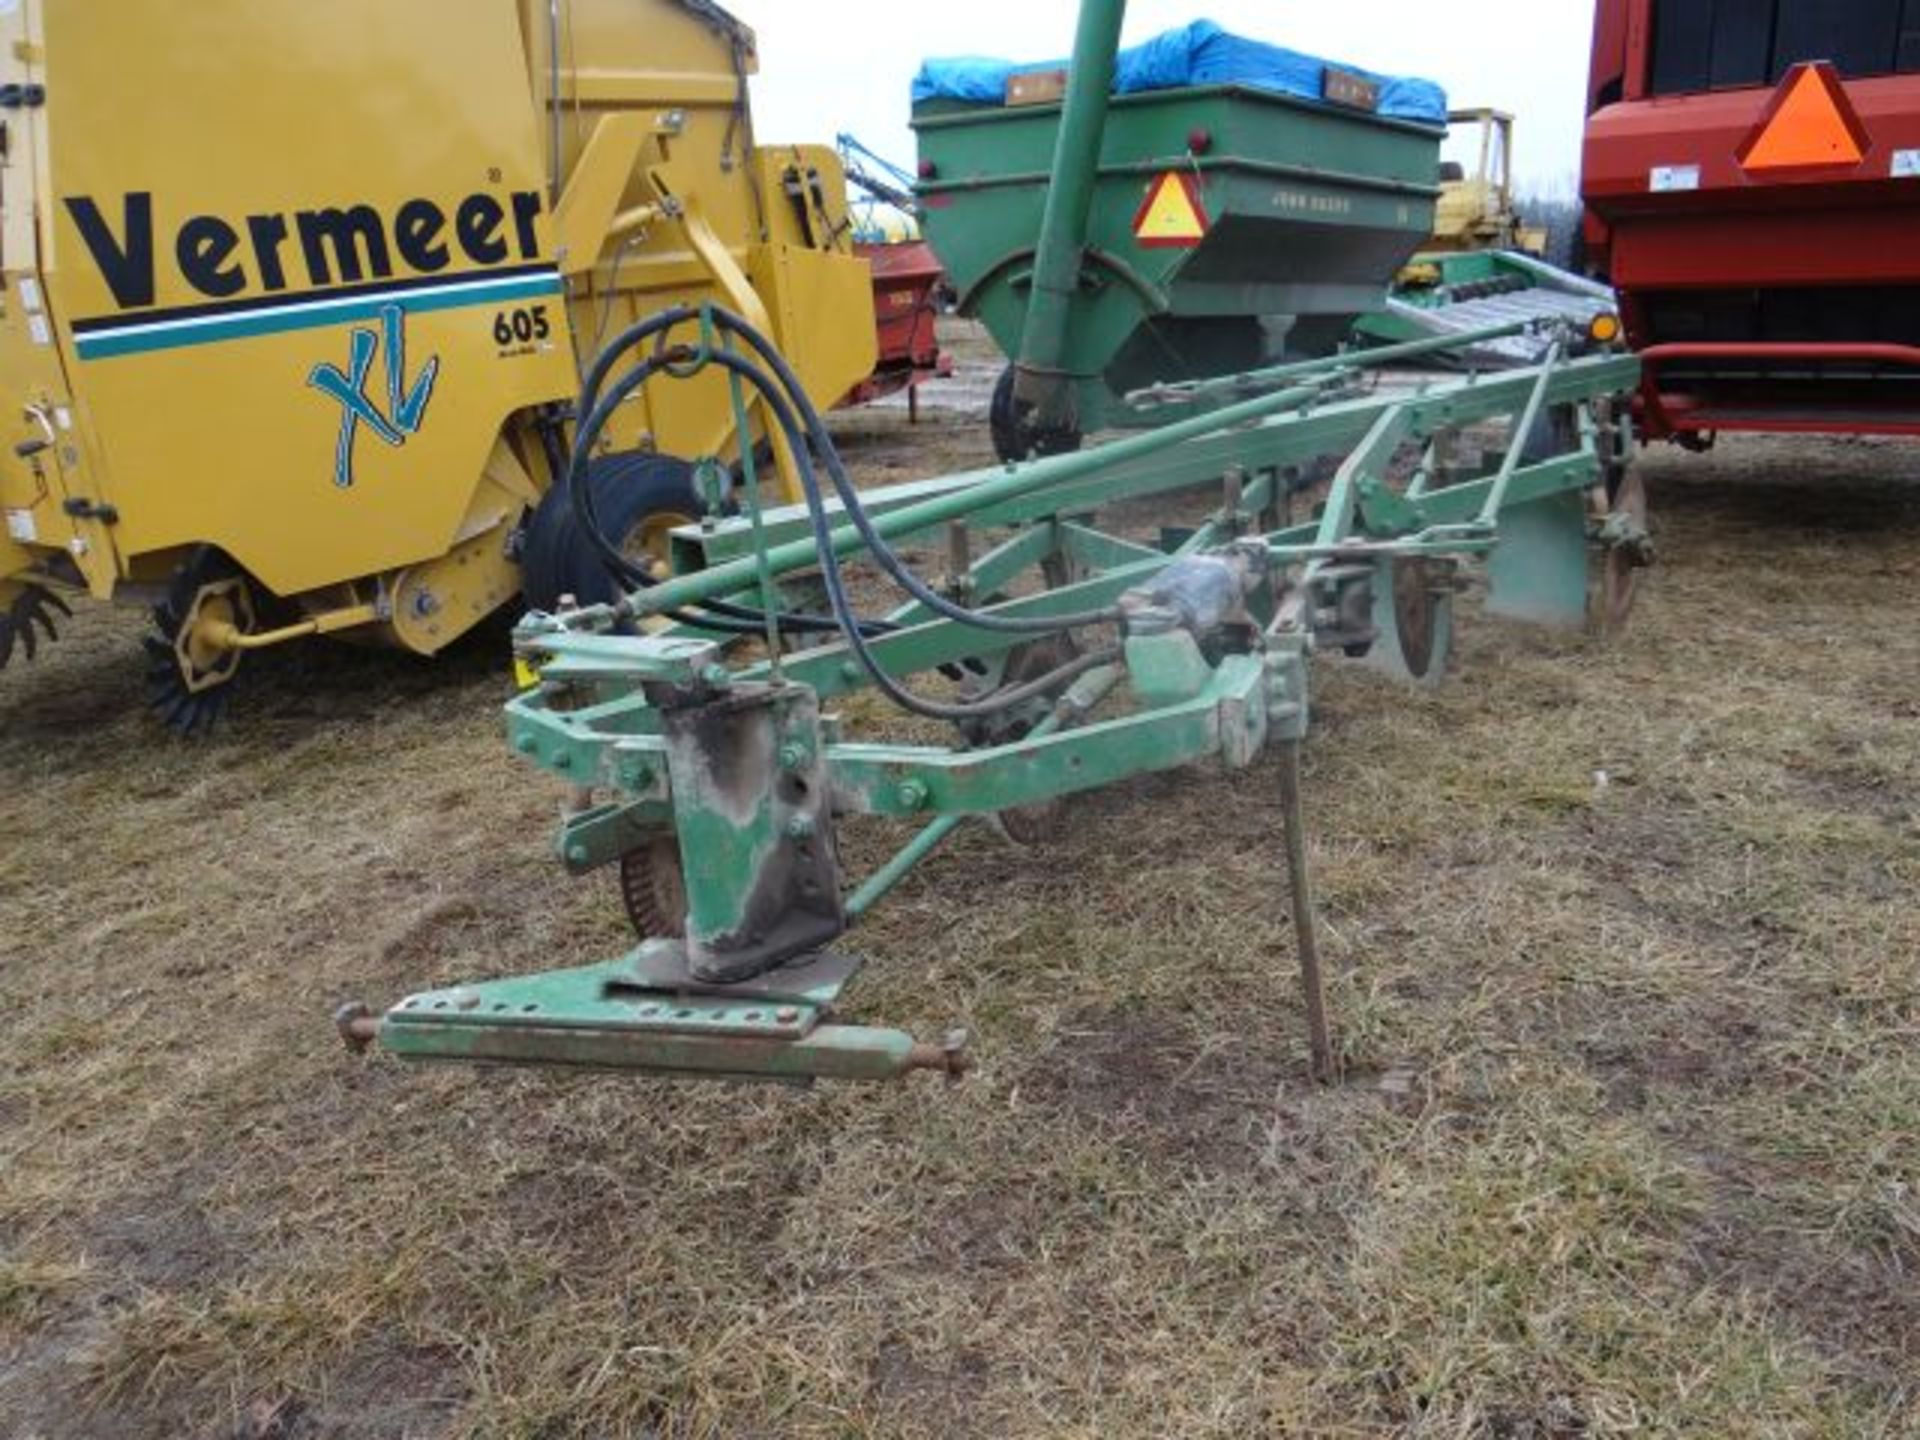 JD F145A Plow 5 Bottom, Manual in the Shed - Bild 2 aus 3